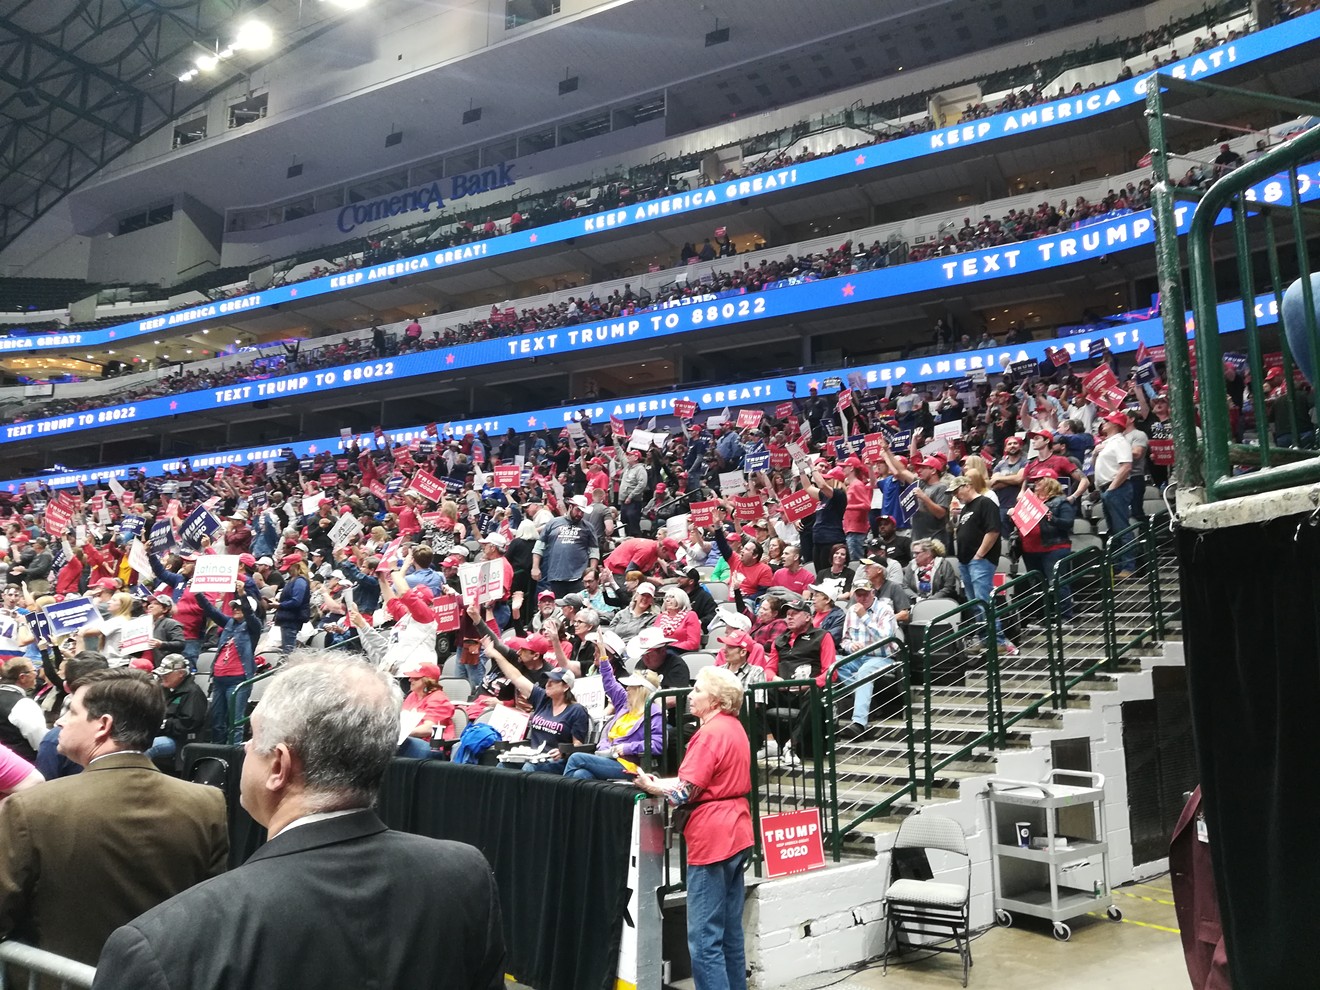 At the prompting of Trump 2020 director Brad Parscale, fans of President Donald Trump chant "four more years" at Trump's Oct. 17, 2019, rally in Dallas.